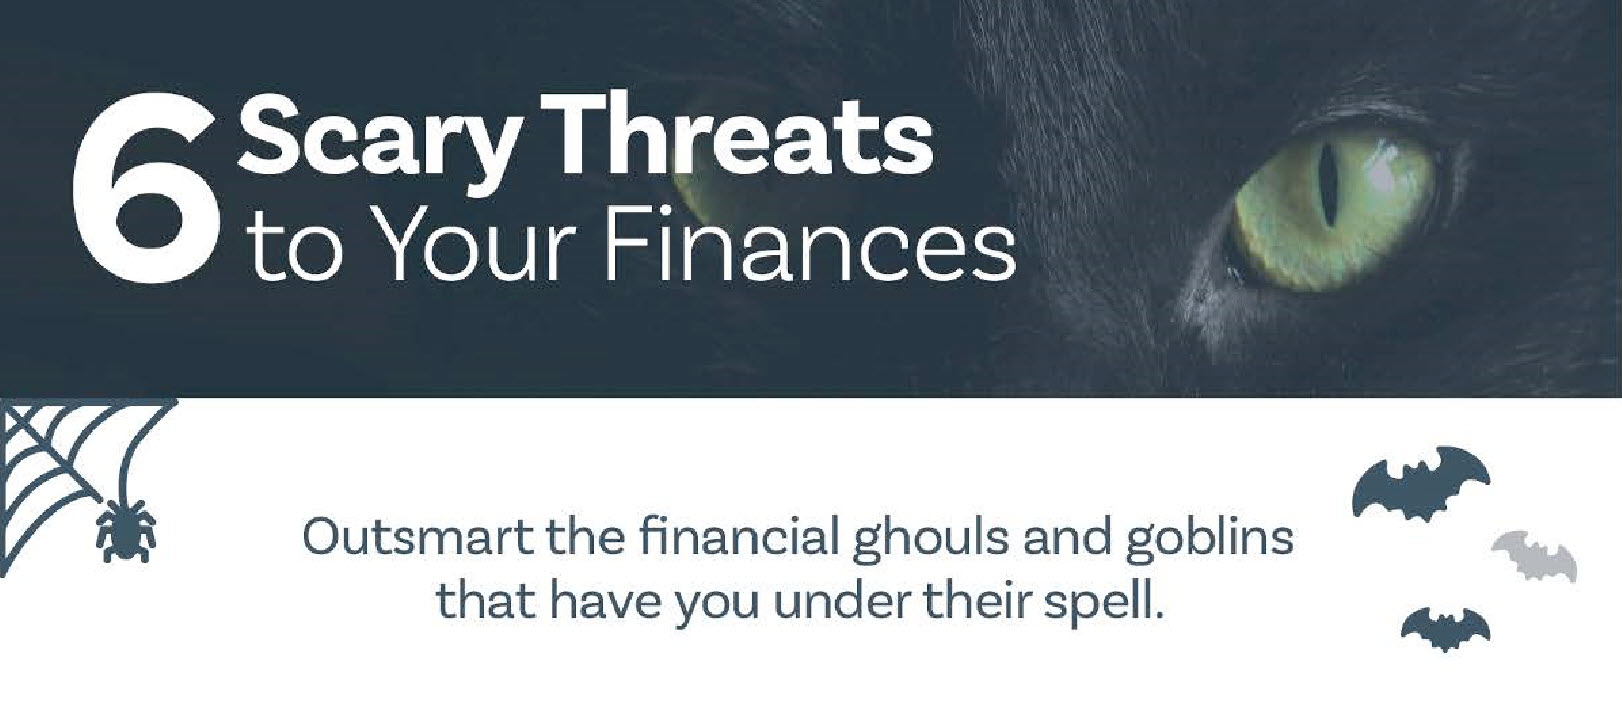 6 Scary Threats to Your Finances thumbnail